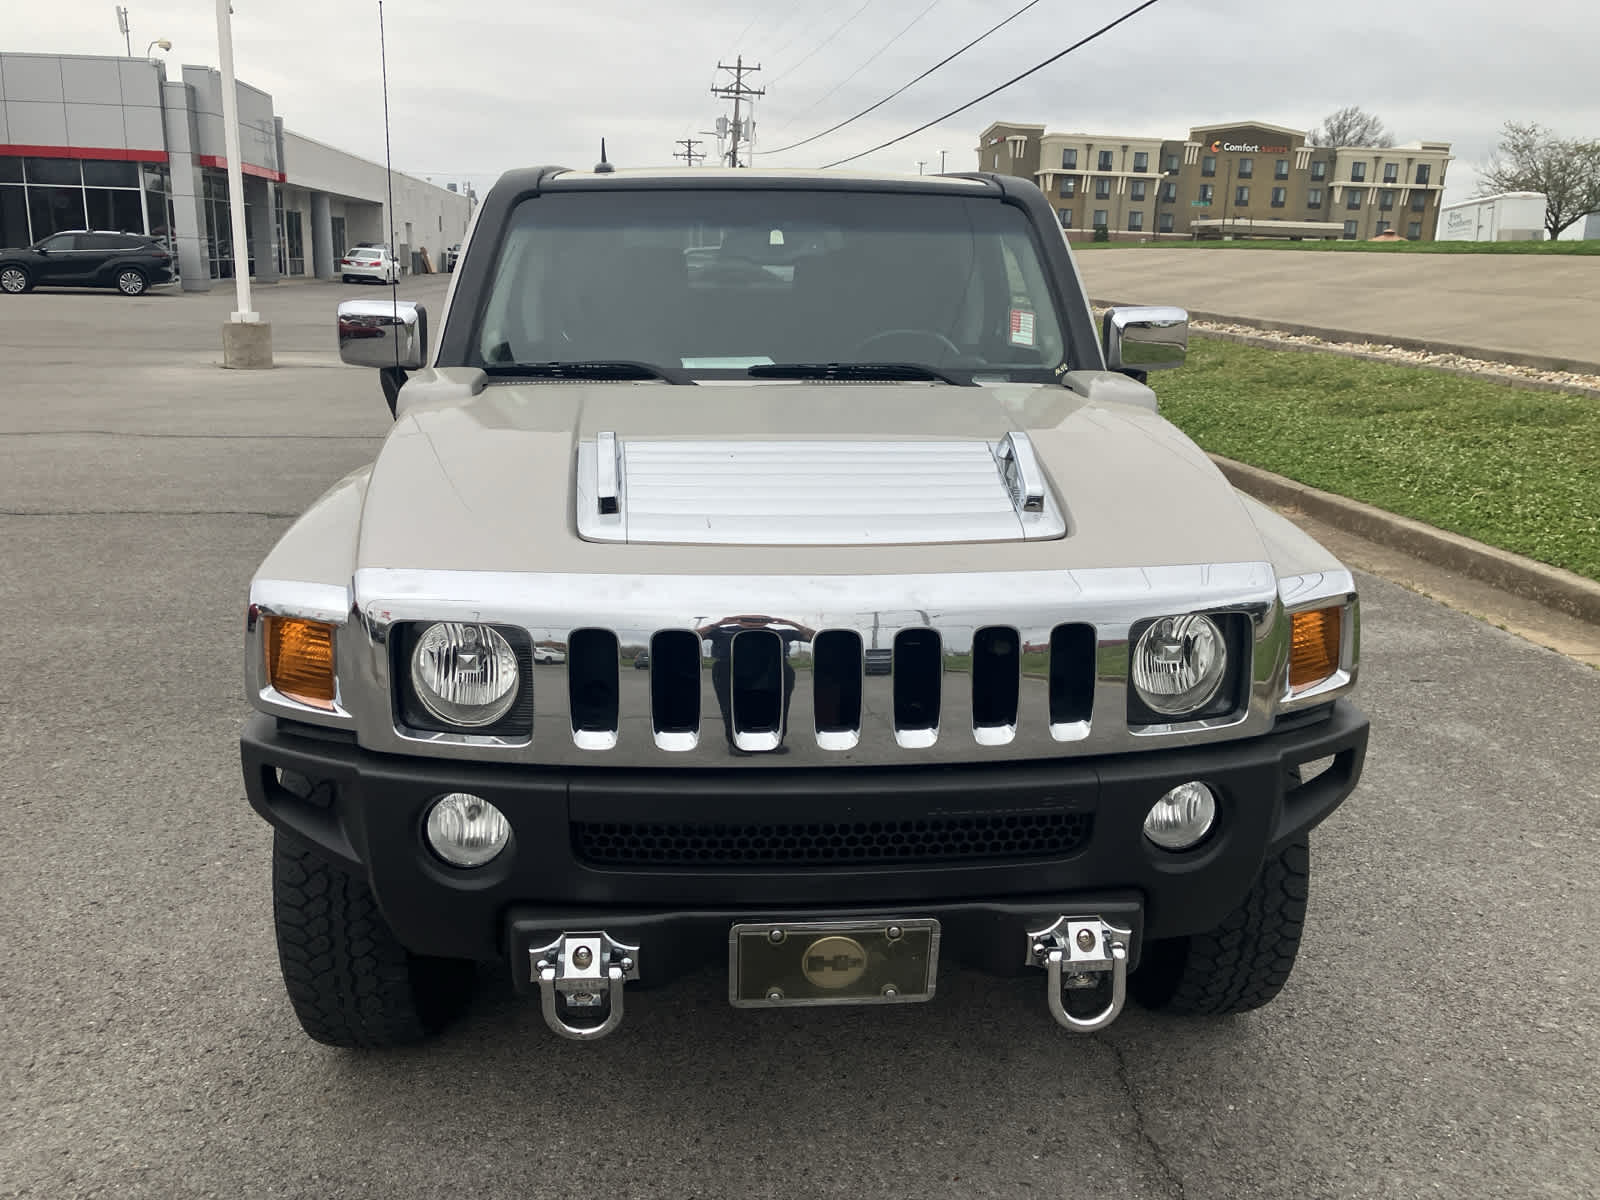 Used 2007 Hummer H3 H3 with VIN 5GTDN13E278191344 for sale in Hopkinsville, KY